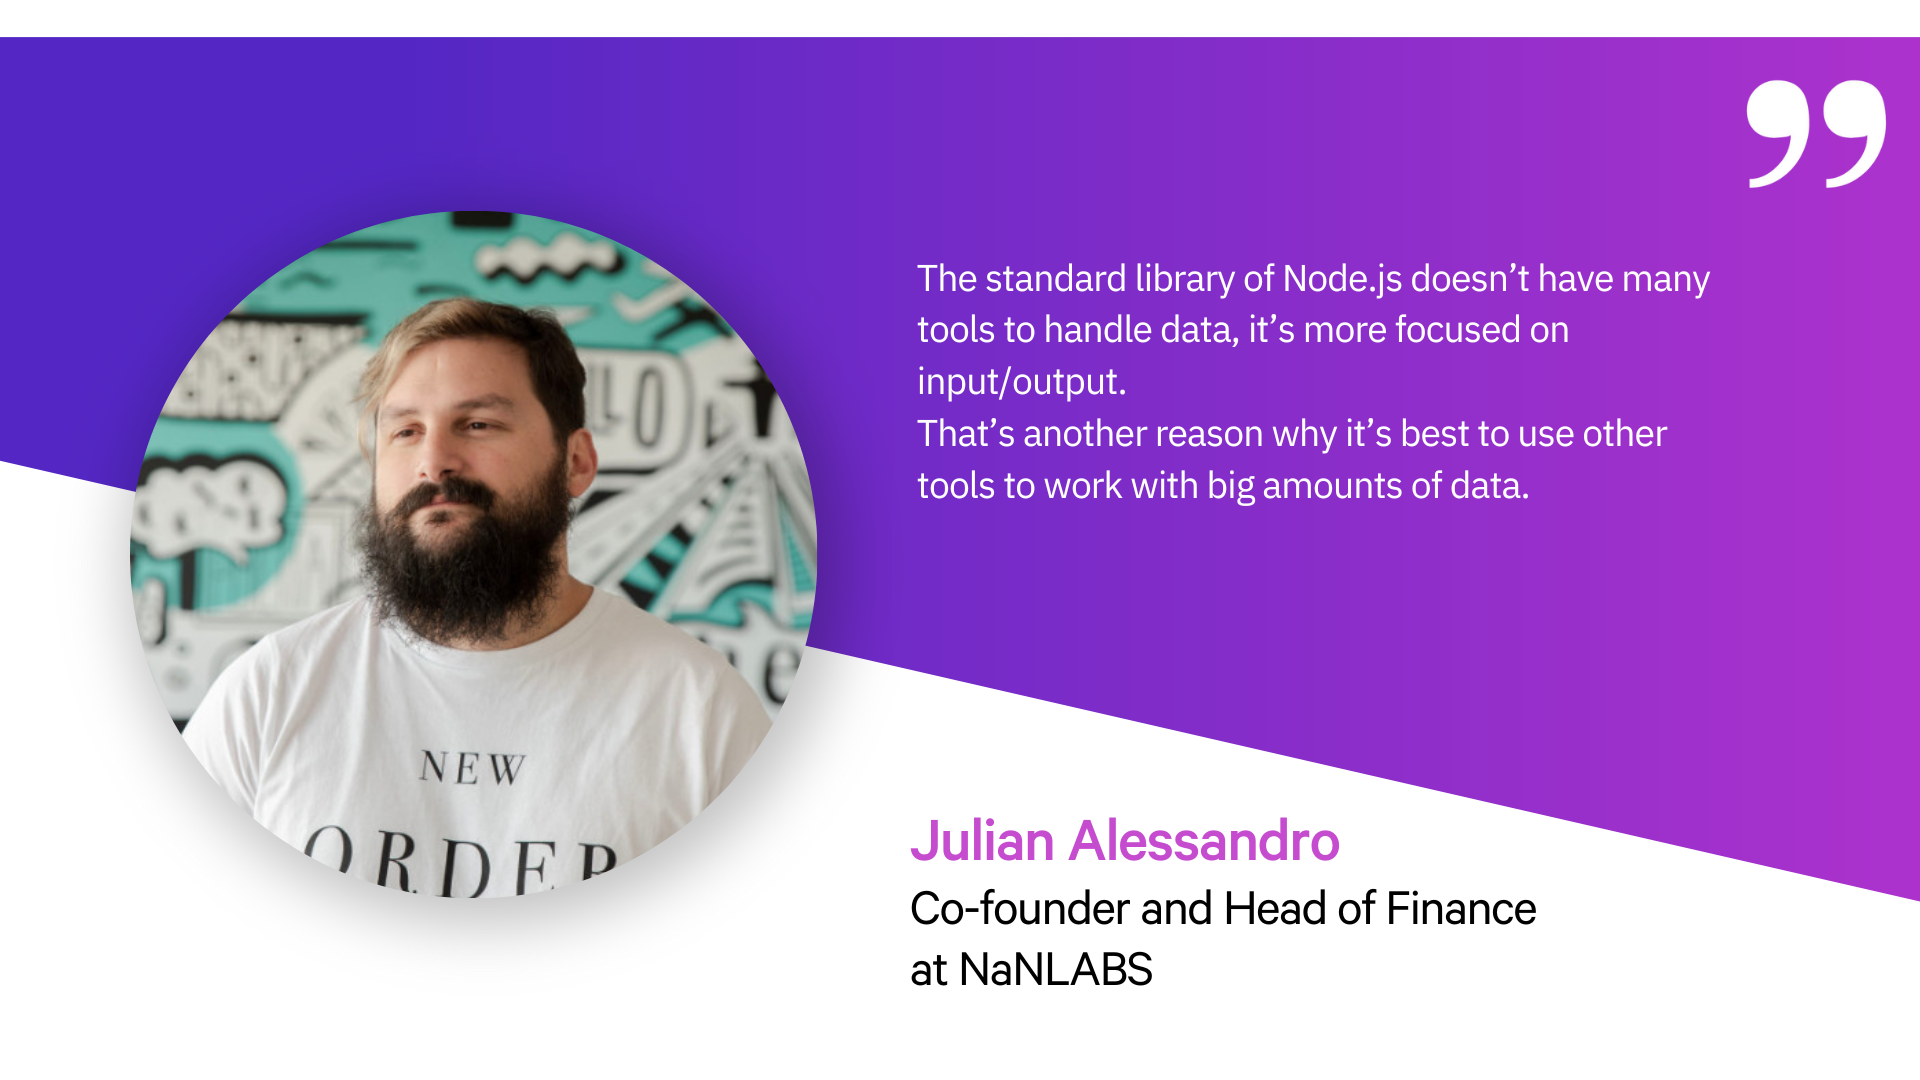 A photo of Julian Alessandro, the co-founder of NaNLABS, besides a quote that reads, “The standard library of Node.js doesn’t have many tools to handle data, it’s more focused on input/output. That’s another reason why it’s best to use other tools to work with big amounts of data.”